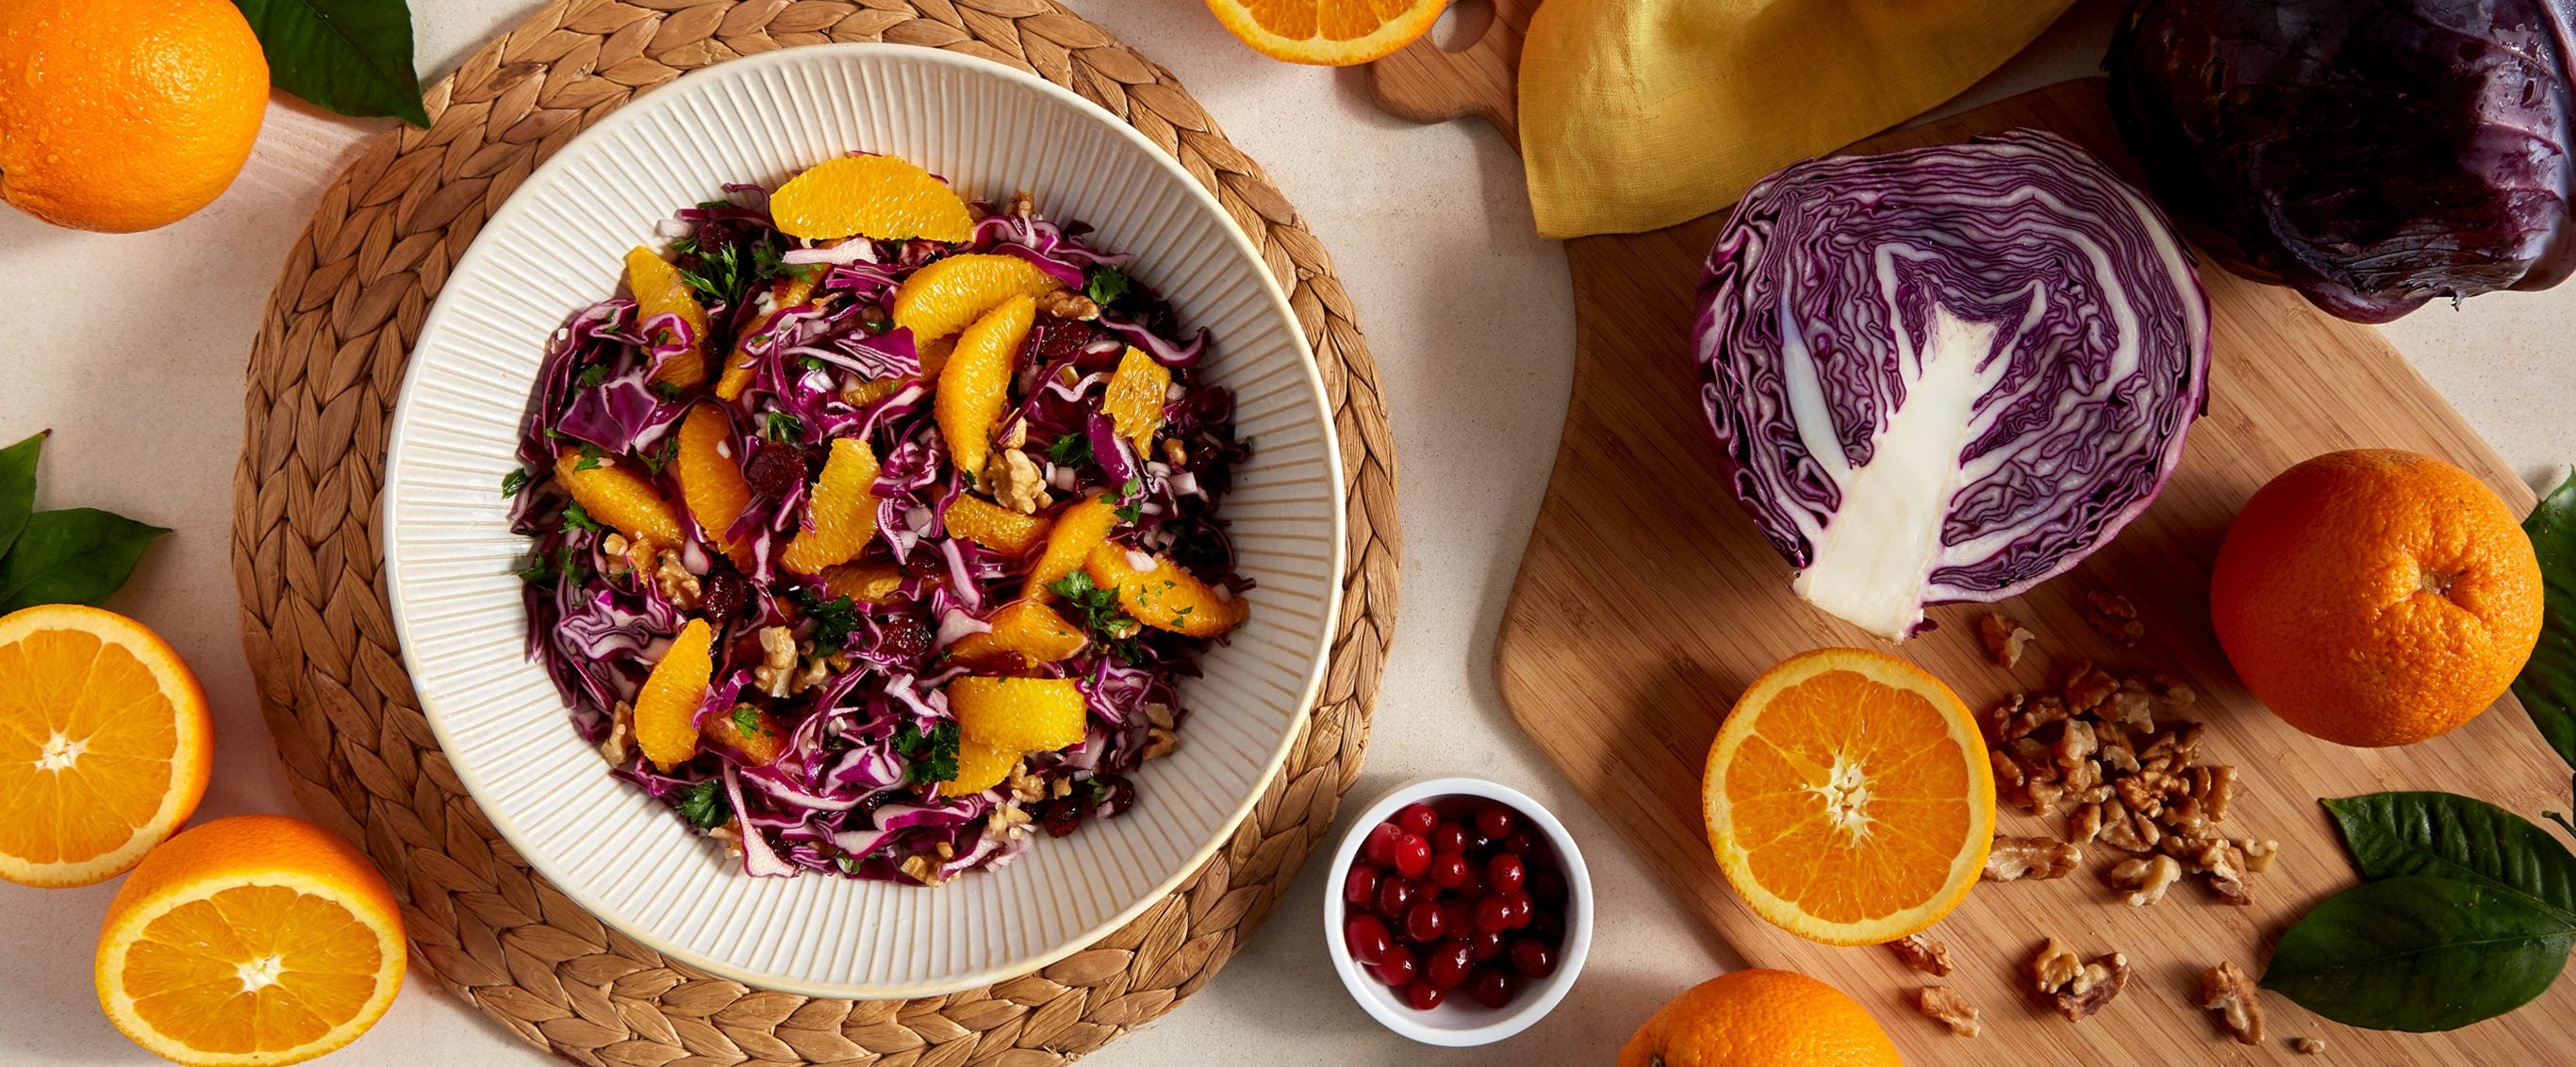 Red Cabbage and Orange Salad for Wordpress